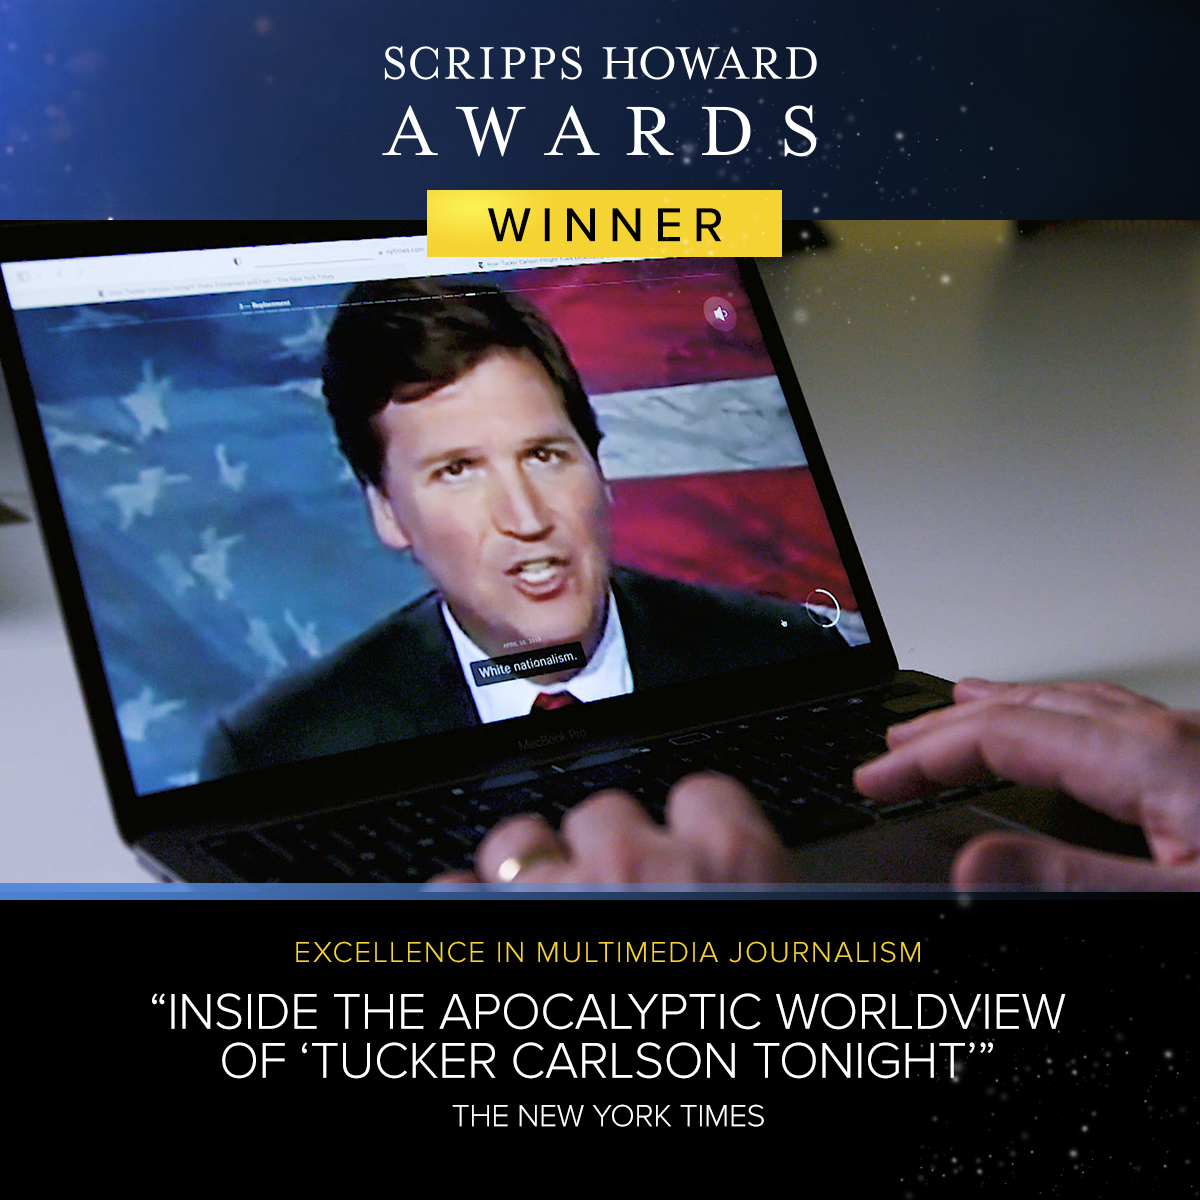 The Scripps Howard Award for Excellence in Multimedia Journalism: The New York Times – “Inside the Apocalyptic Worldview of ‘Tucker Carlson Tonight’” The #ScrippsHowardAwards are happening NOW on @ScrippsNews. Watch @nytimes’ reporting: scripps.com/fund/journalis…